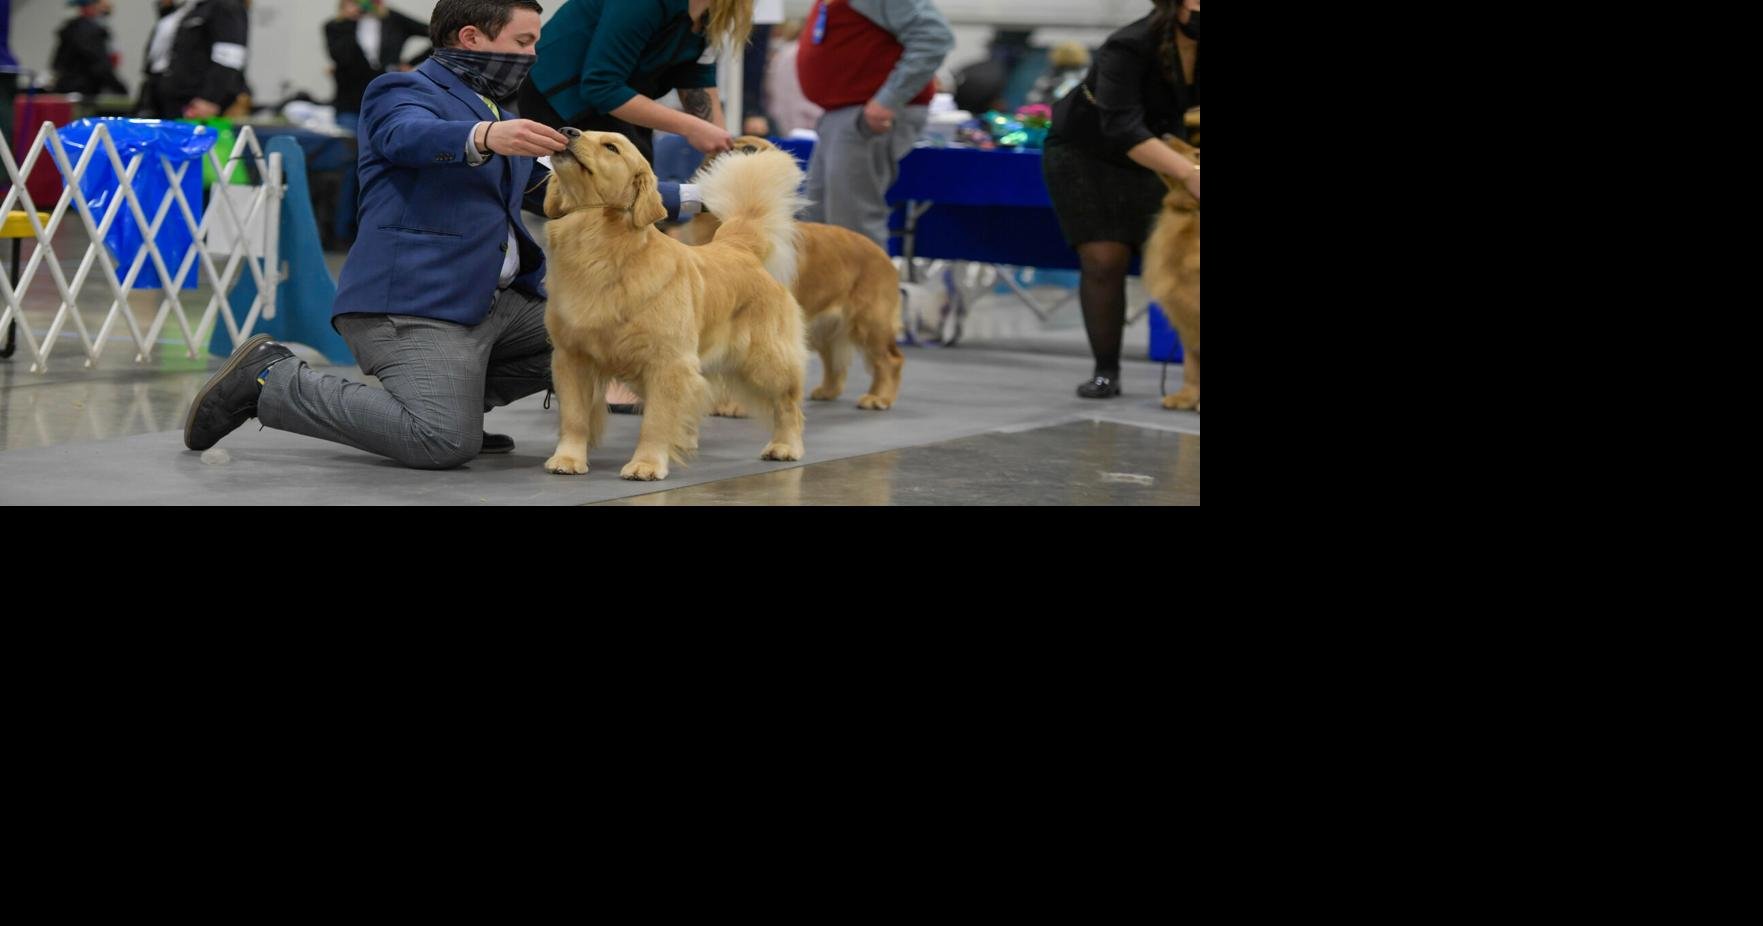 Gallery Albany dog show